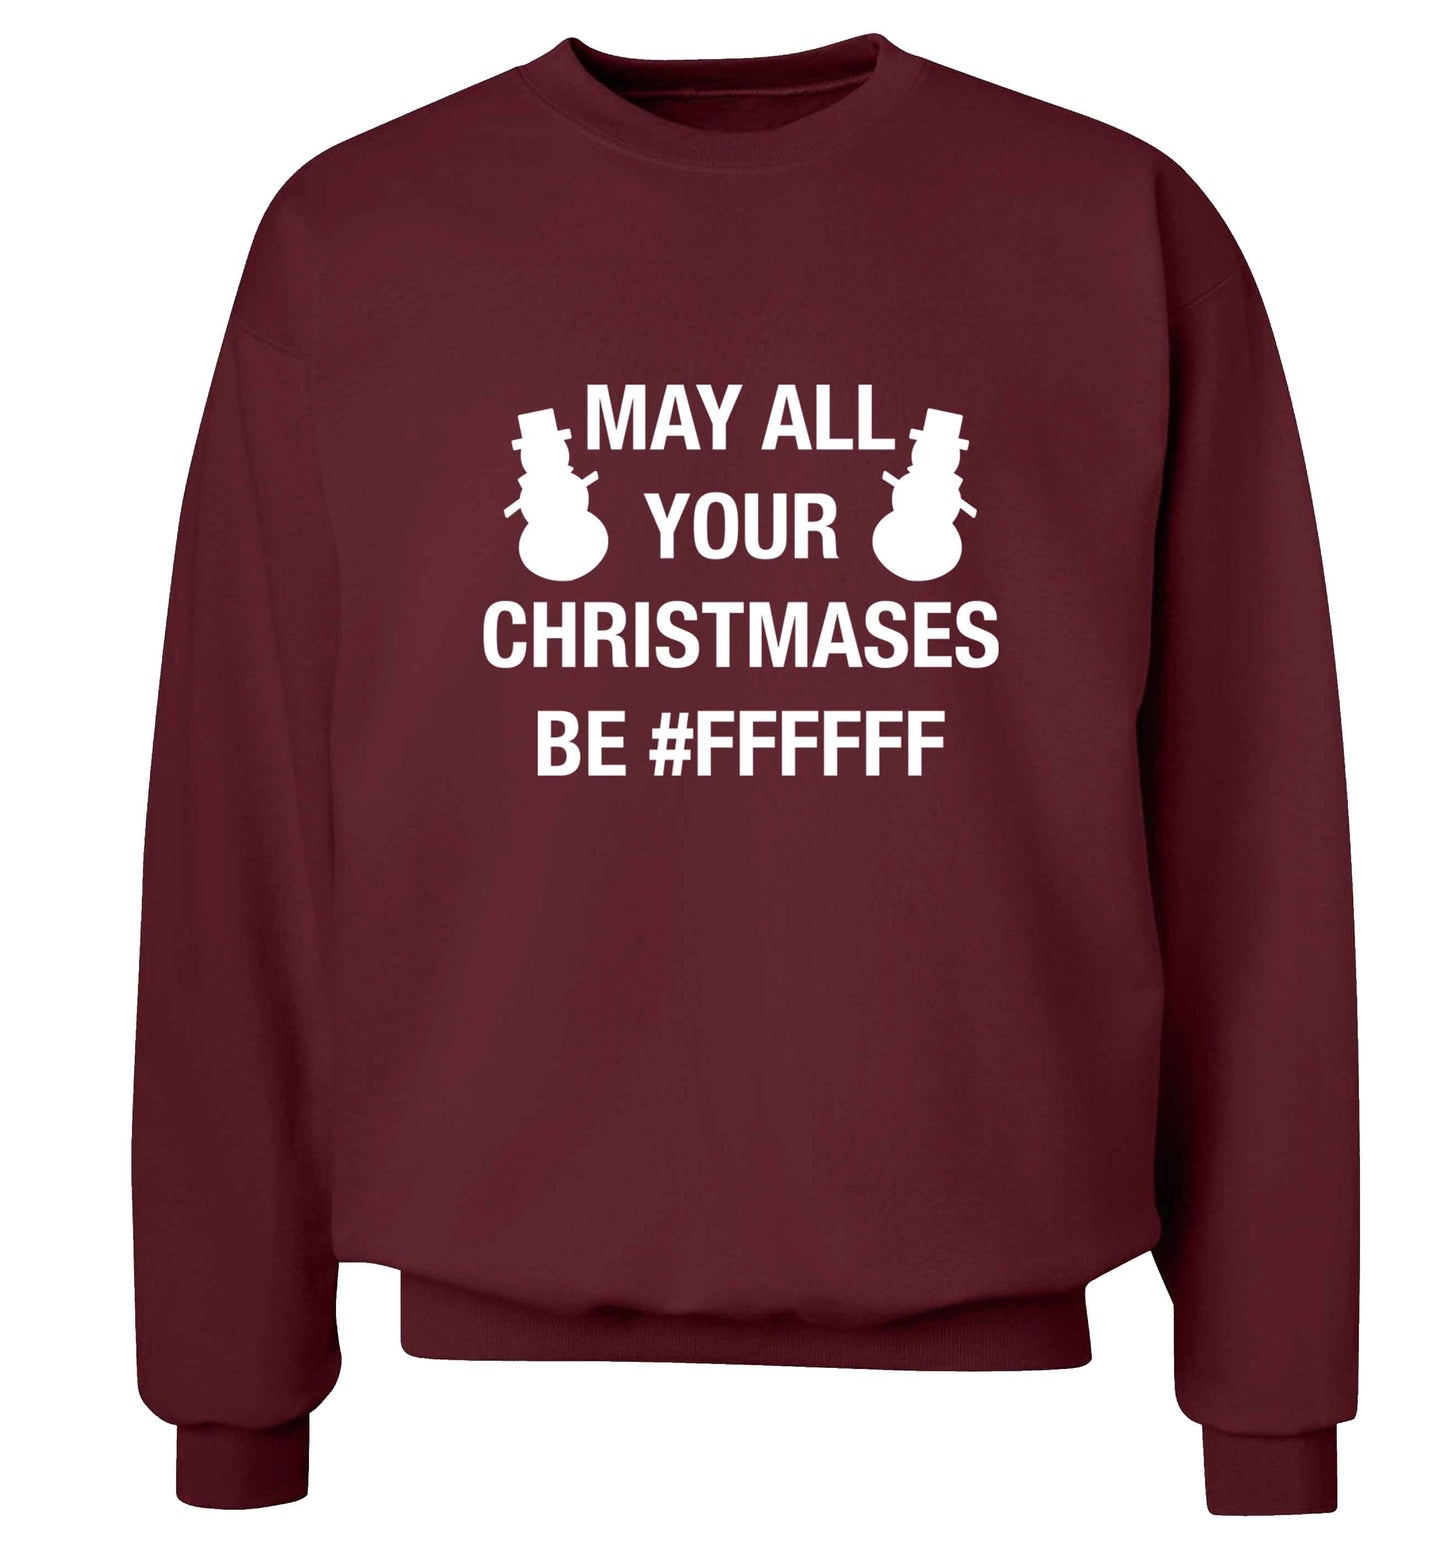 May all your Christmases be #FFFFFF adult's unisex maroon sweater 2XL